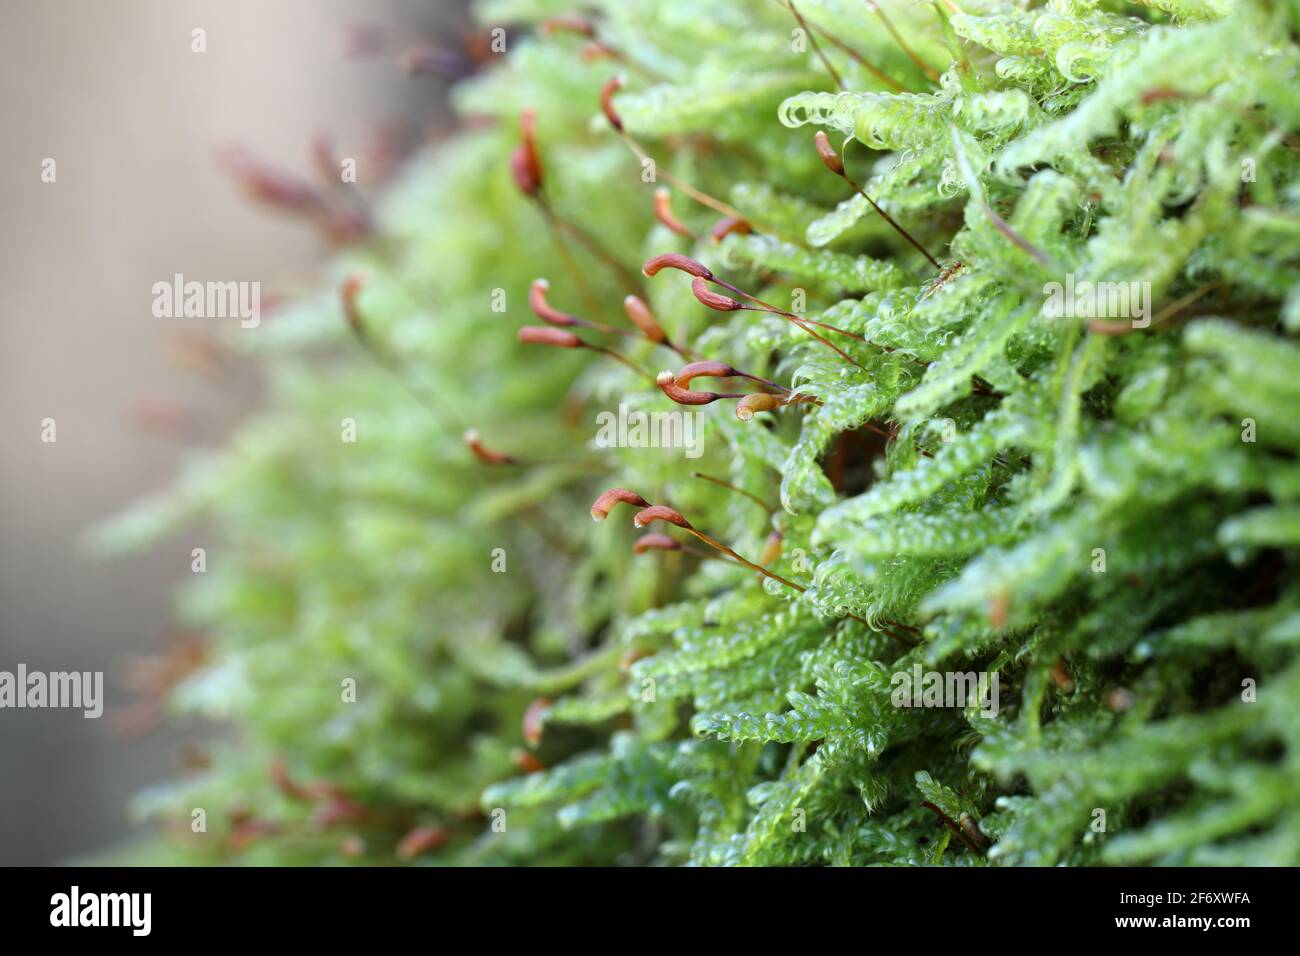 Close up View of Moss Detail Showing Spore Fruiting Heads Growing on a Branch, North Pennines, Teesdale, County Durham, UK Stock Photo